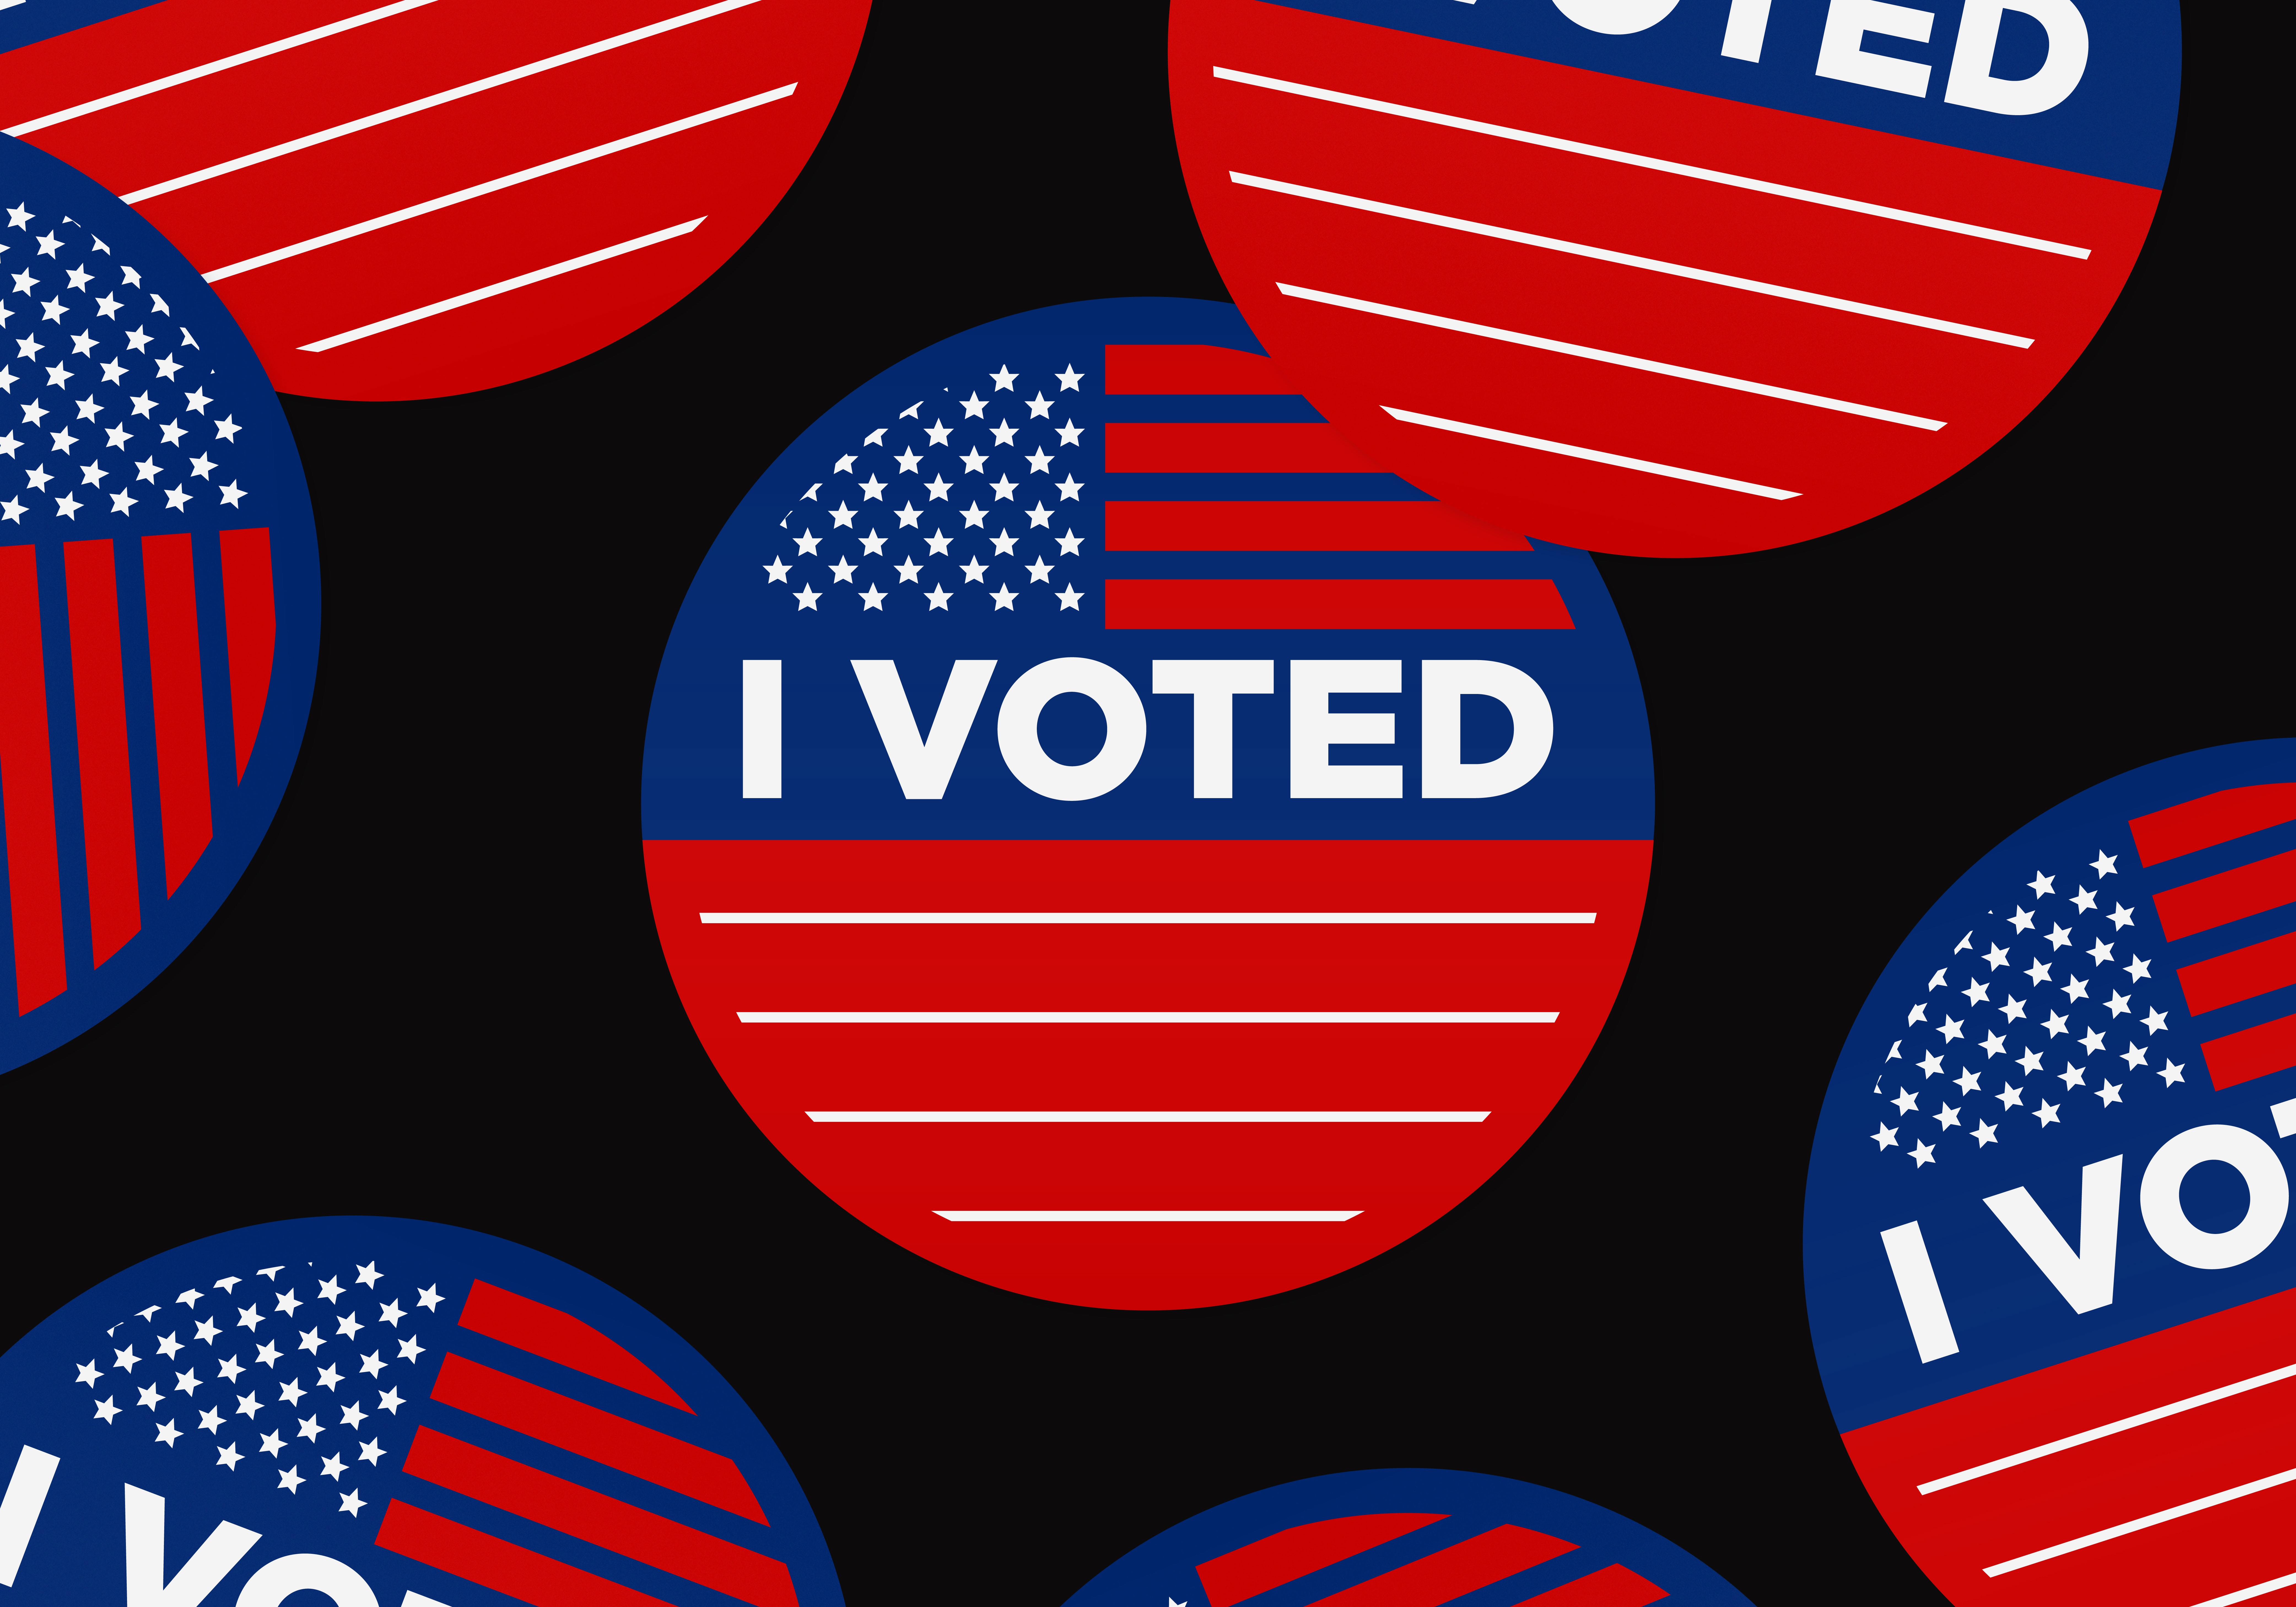 I voted stickers on a black background